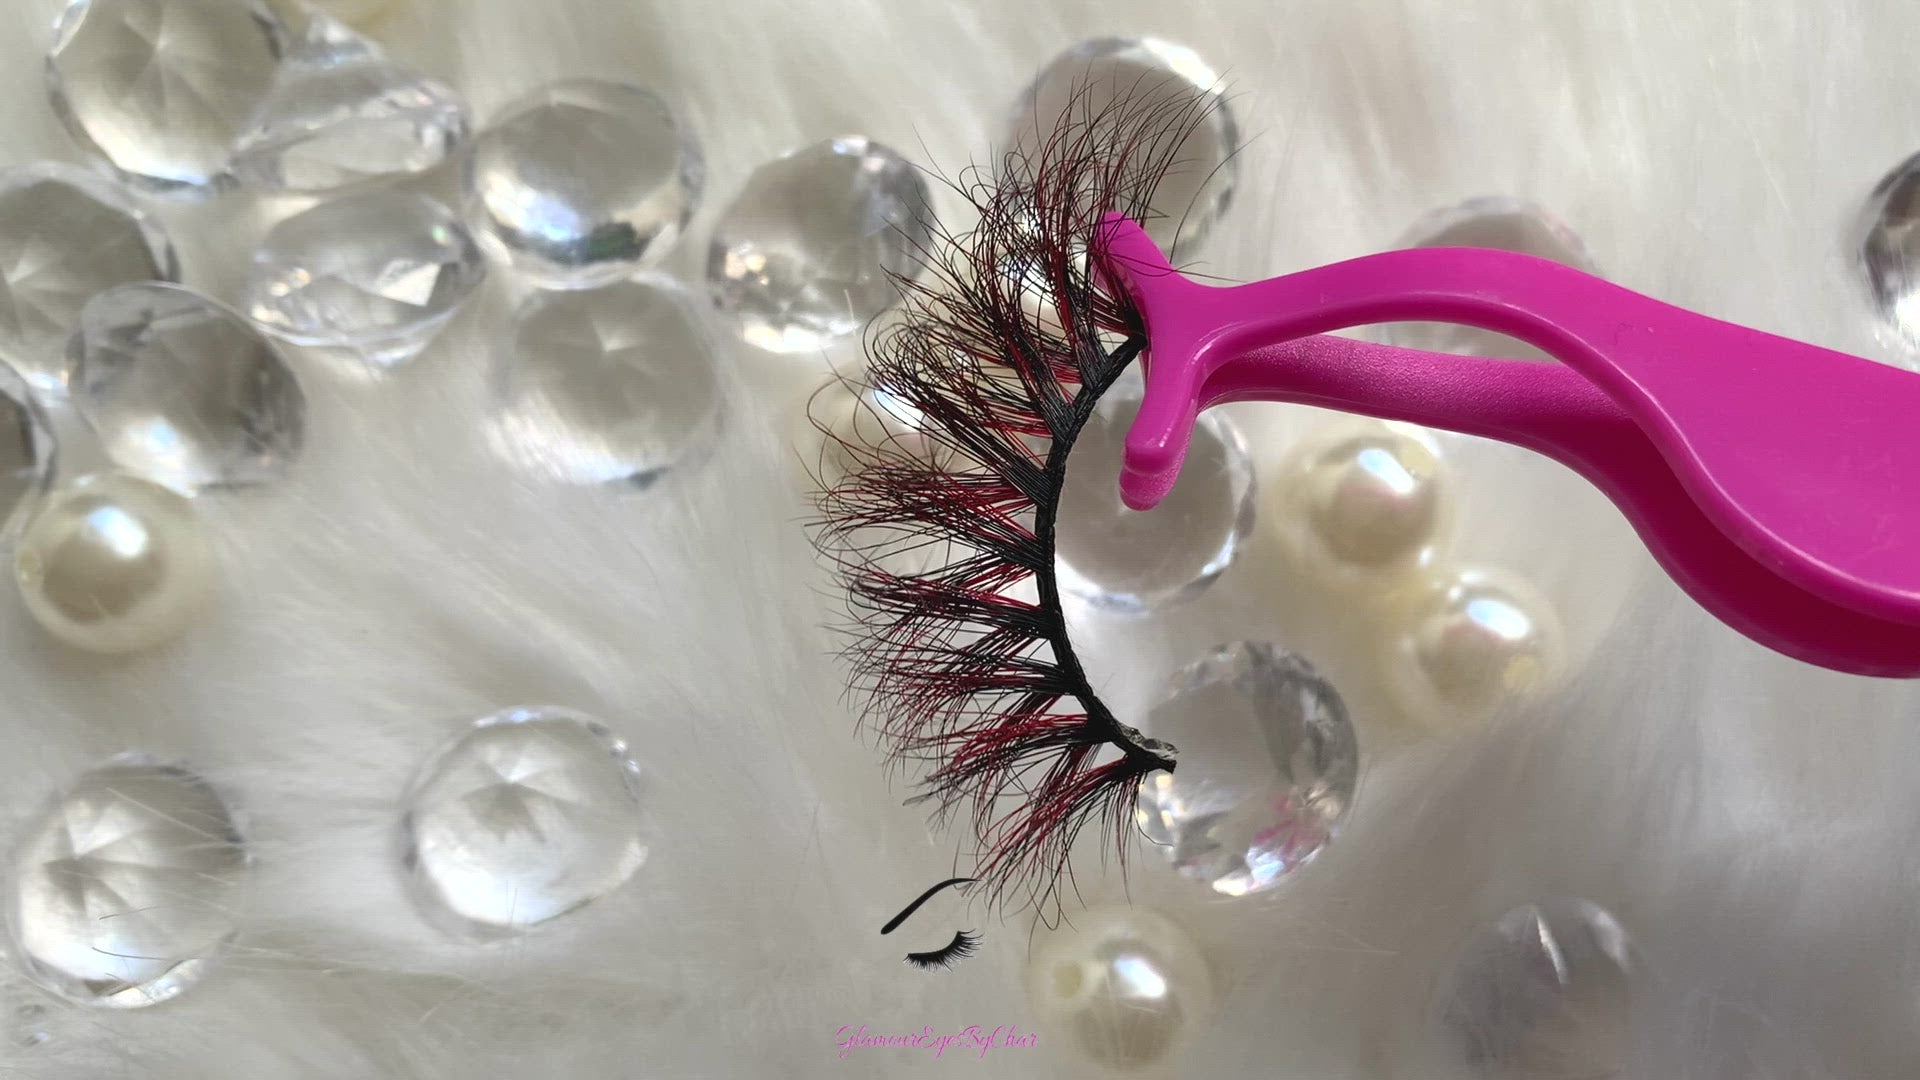 These 9D luxurious mink lashes are called Party Starter and are 17-20mm in length. They add a subtle pop of colour to your eyes and are comfortable to wear on the lids. The thin lashband, makes the application process a breeze. Party Starter are suitable for playful eye looks and can be worn up to 25 times if handled with care.